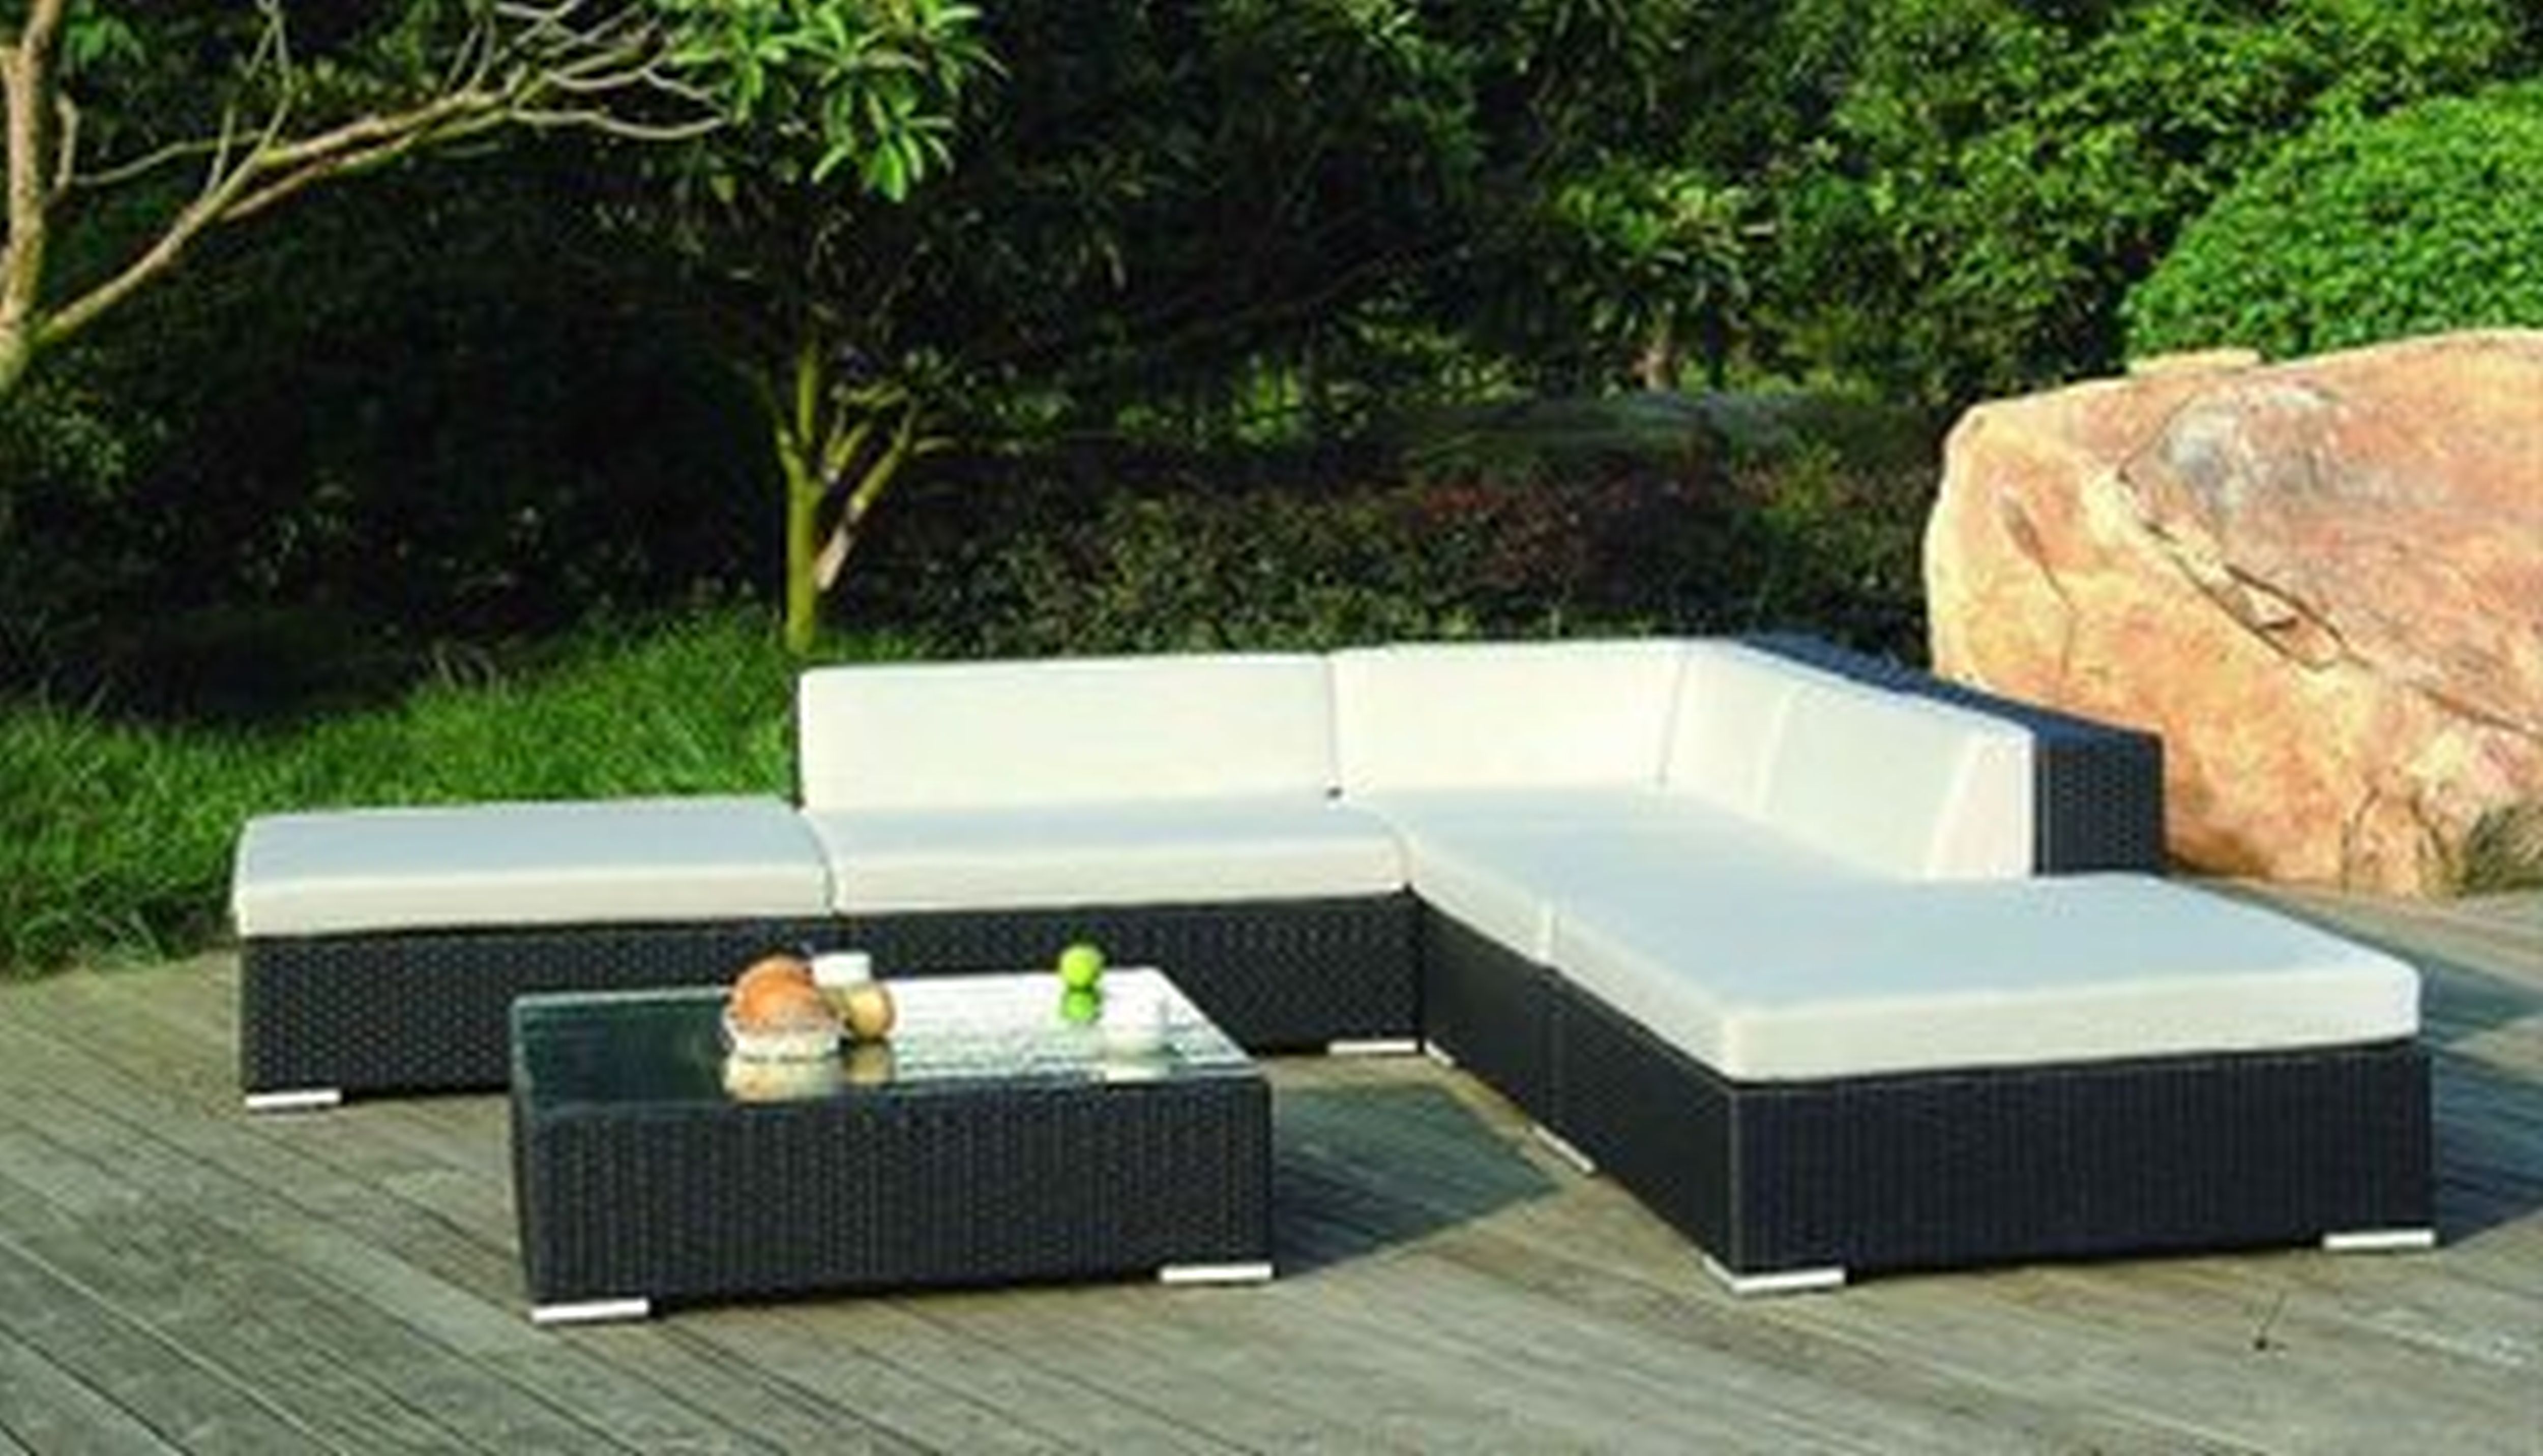 Furniture : Furniture Magnificent Wicker Patio Sets Lovely Modern As For Patio Sofas (View 10 of 10)